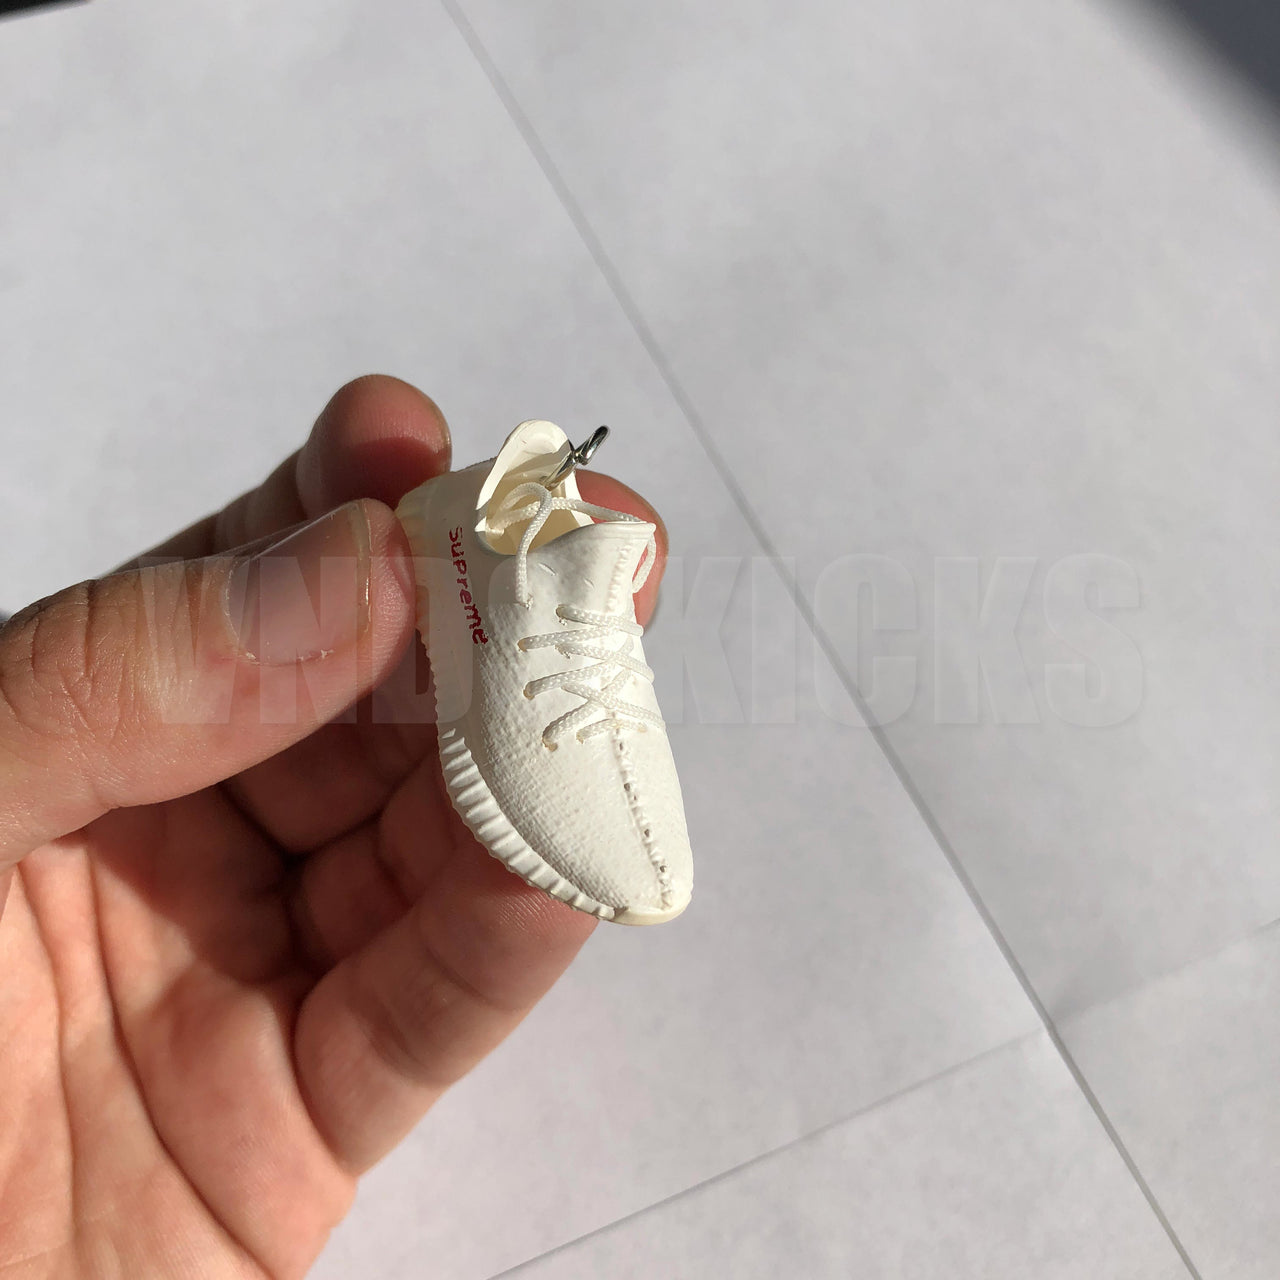 Yeezy 350 Boost "Supreme" - Sneakers 3D Keychain